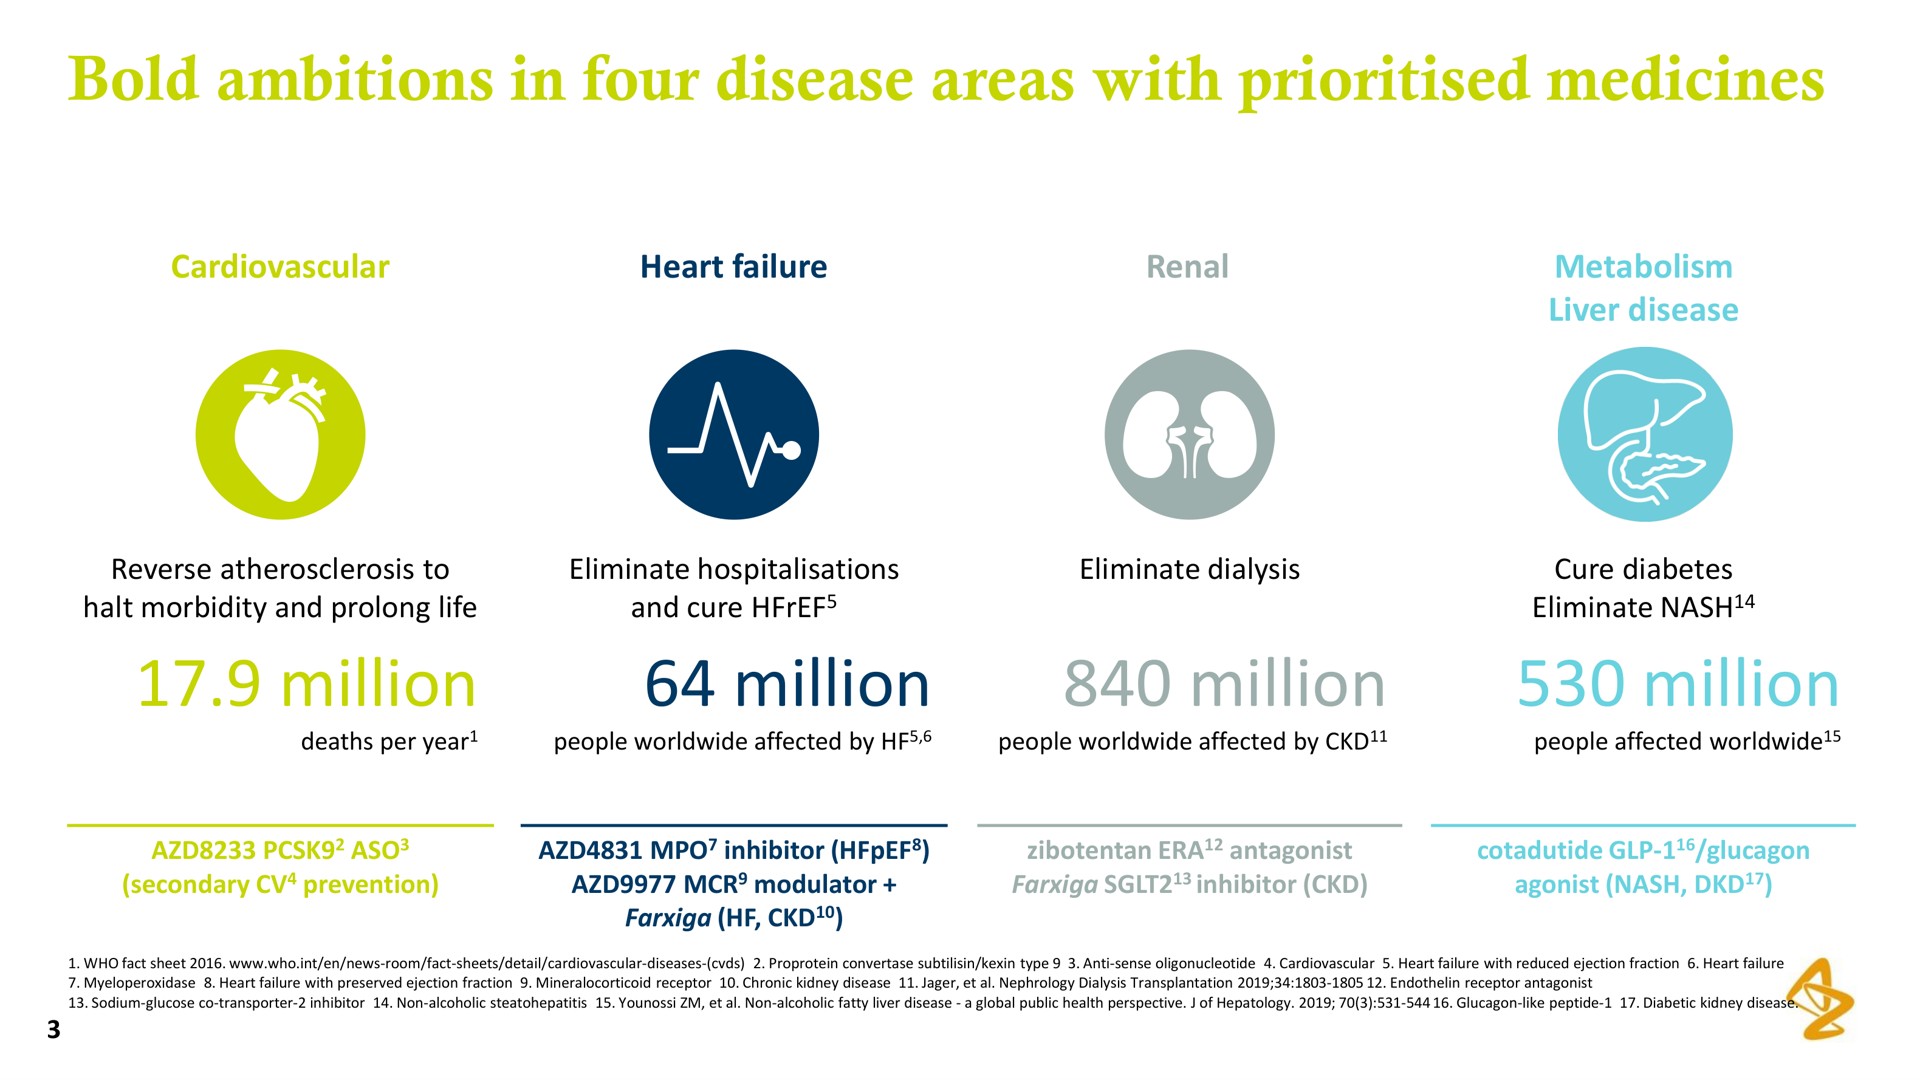 bold ambitions in four disease areas with medicines million million million million | AstraZeneca